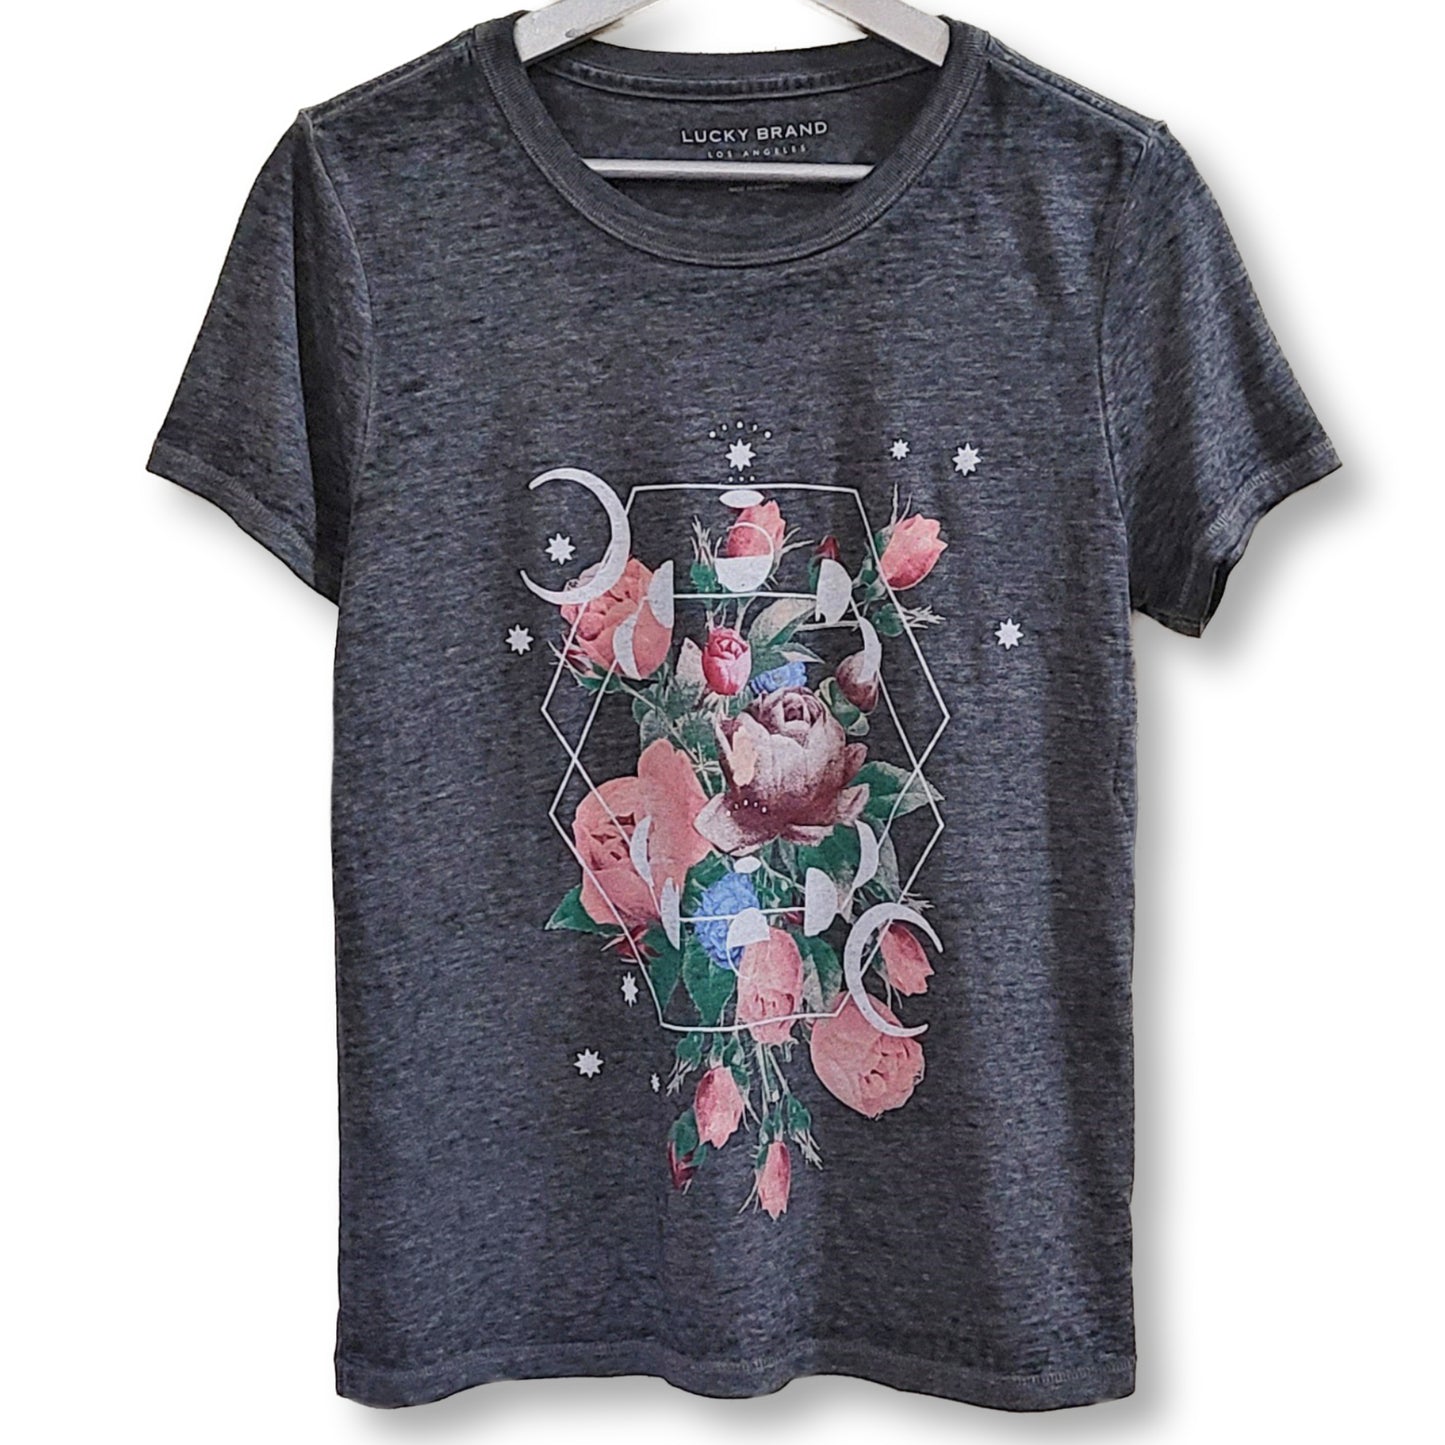 Lucky Brand Moon and Flowers Graphic Print Classic Cotton Blent T-Shirt